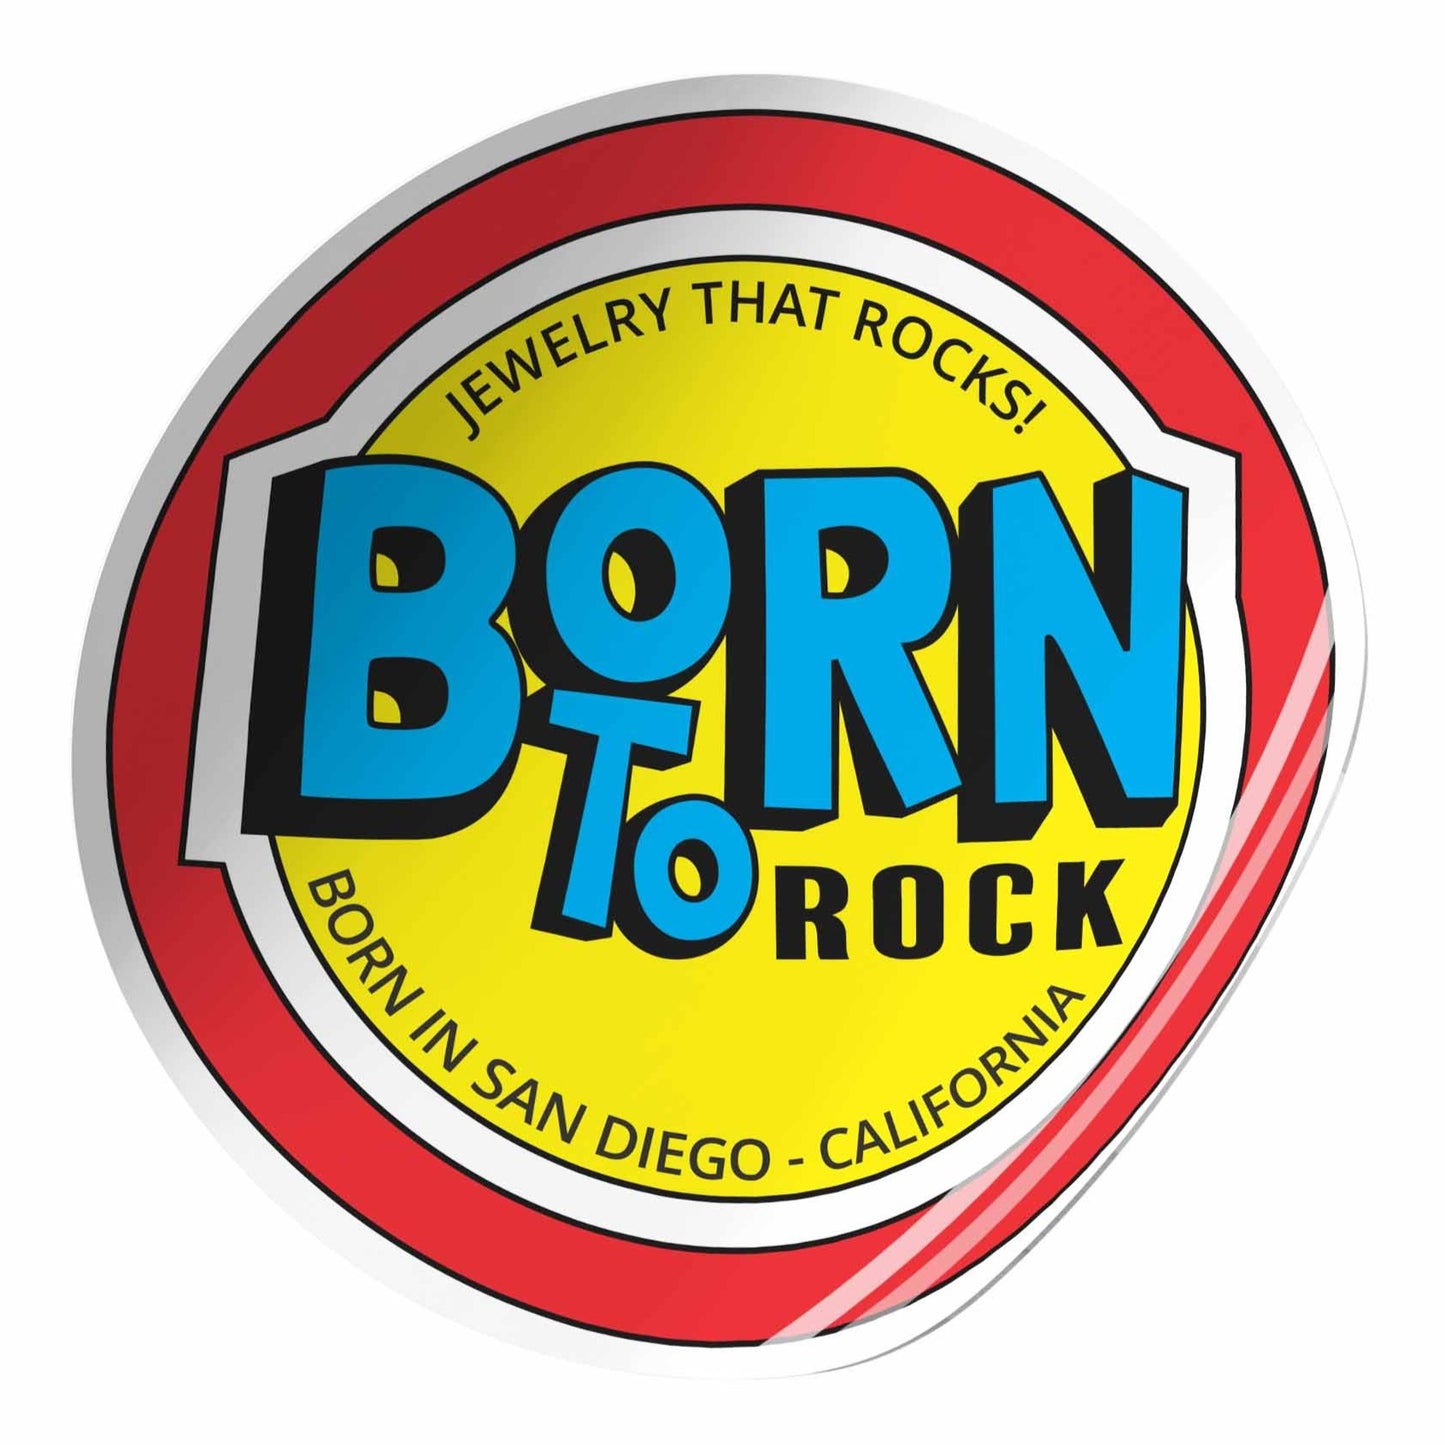 FREE Born to Rock sticker available in every online order! Our colorful sticker is great for decorating water bottles, car windows, journals, notebooks, laptops, cups, bikes, skateboards, anything you want to add that extra color and fun!